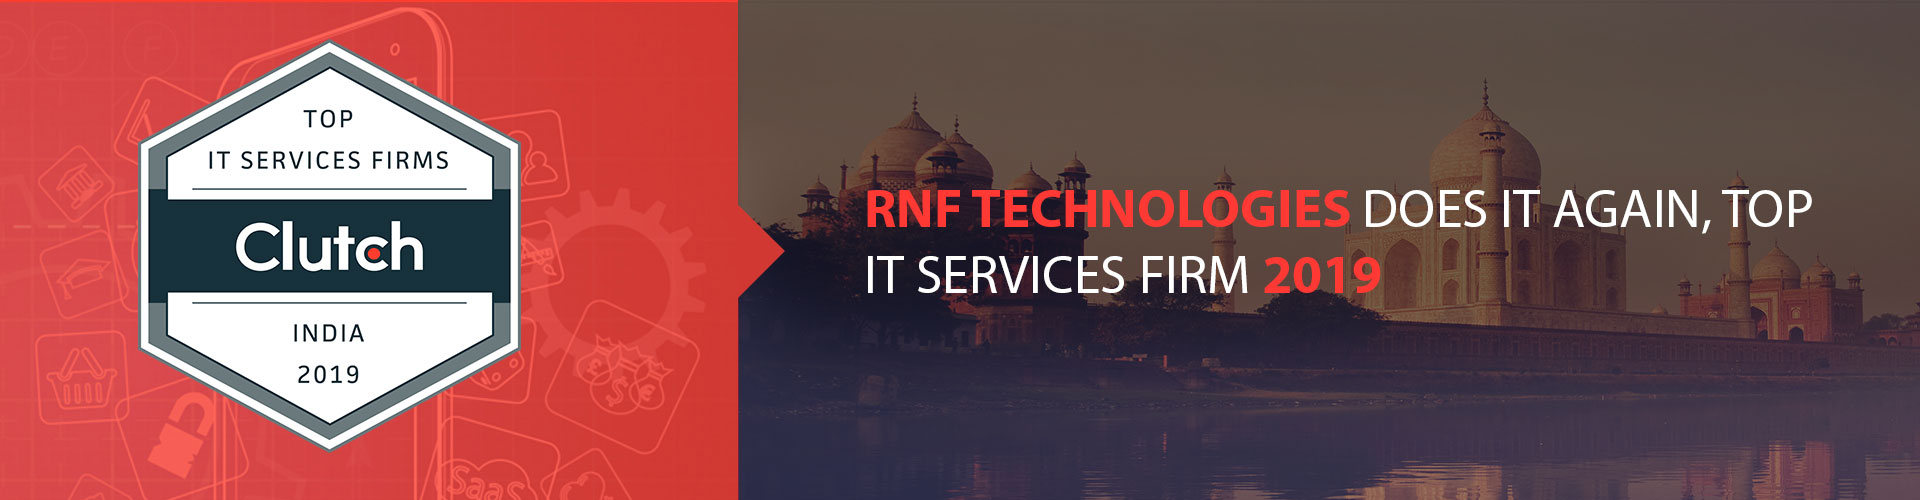 RNF Technologies Does it Again, TOP IT SERVICES FIRM 2019 – RNFTechnologies